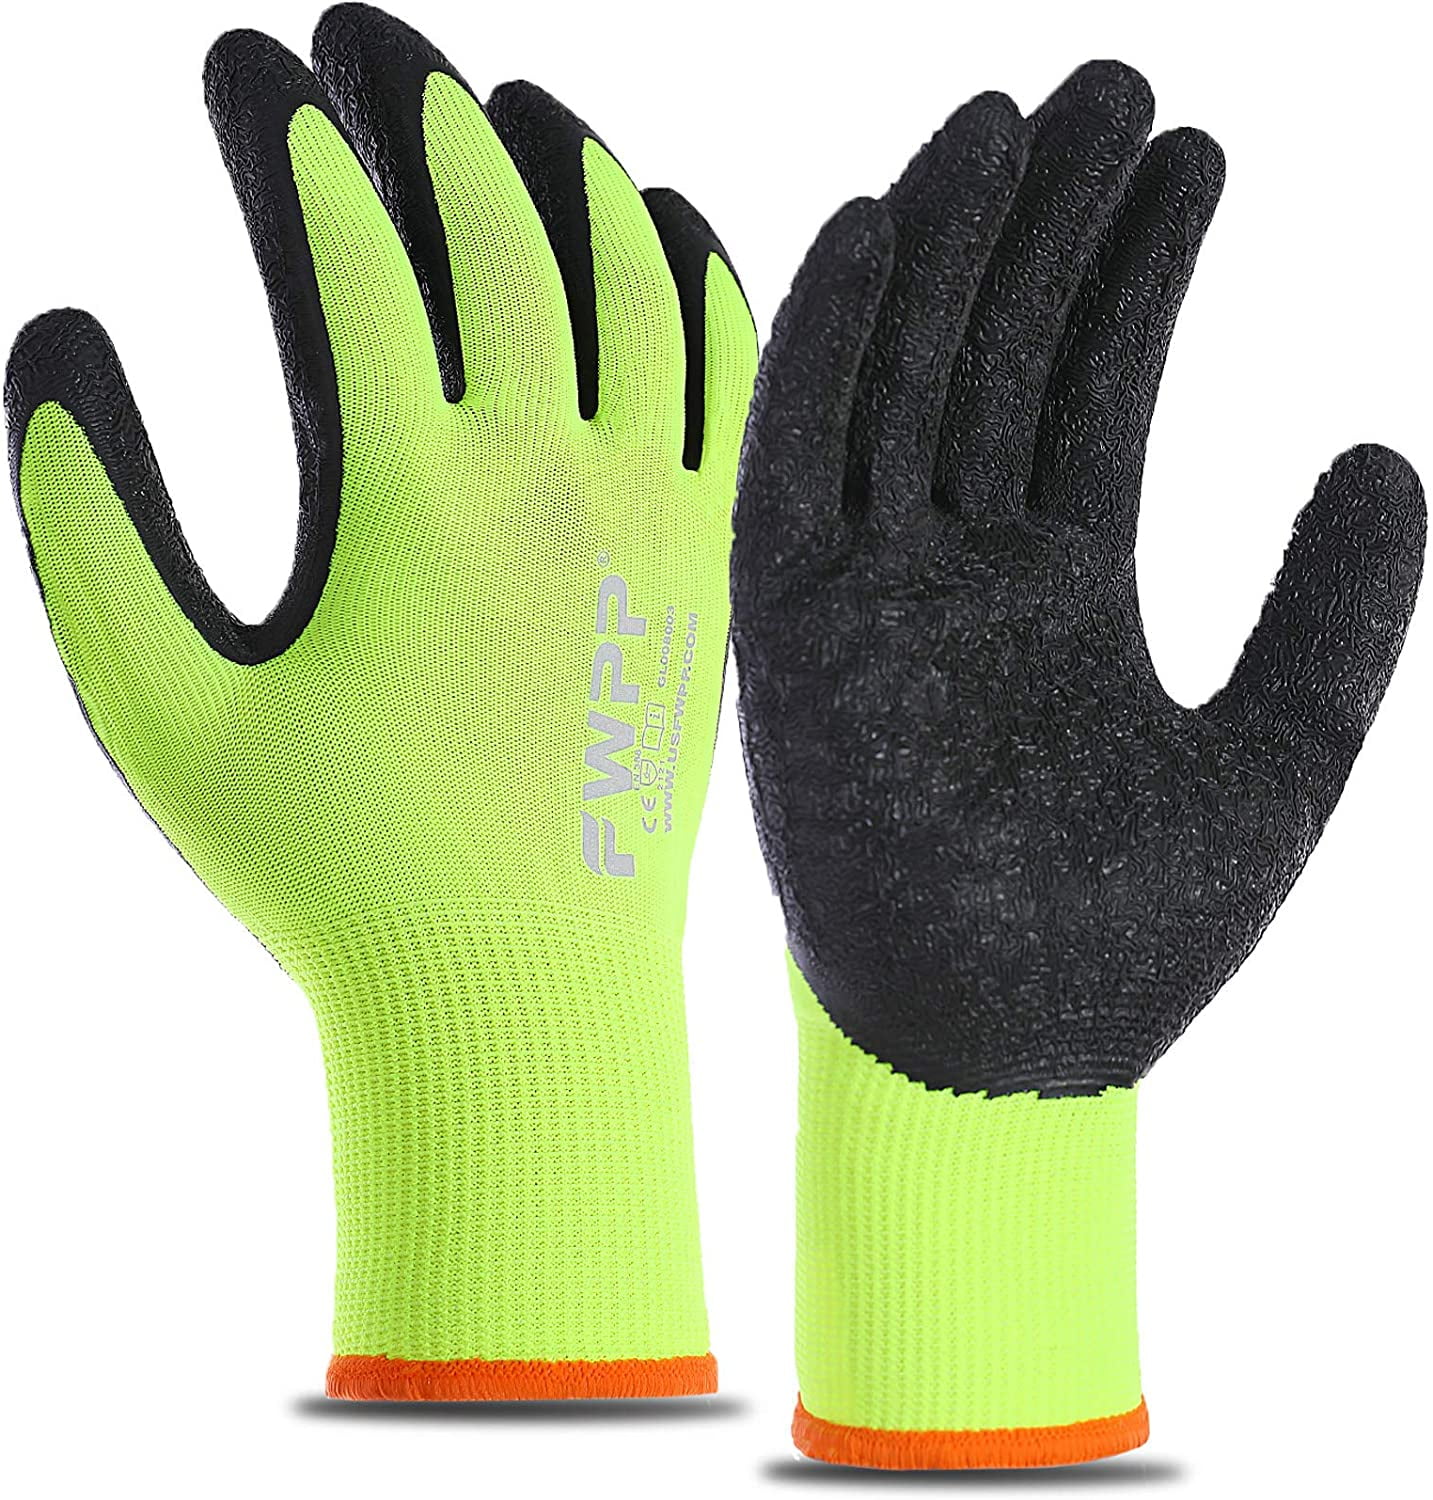 Latex Coated Rubber Work Gloves Safety Gardening Builders Mechanic Construction 